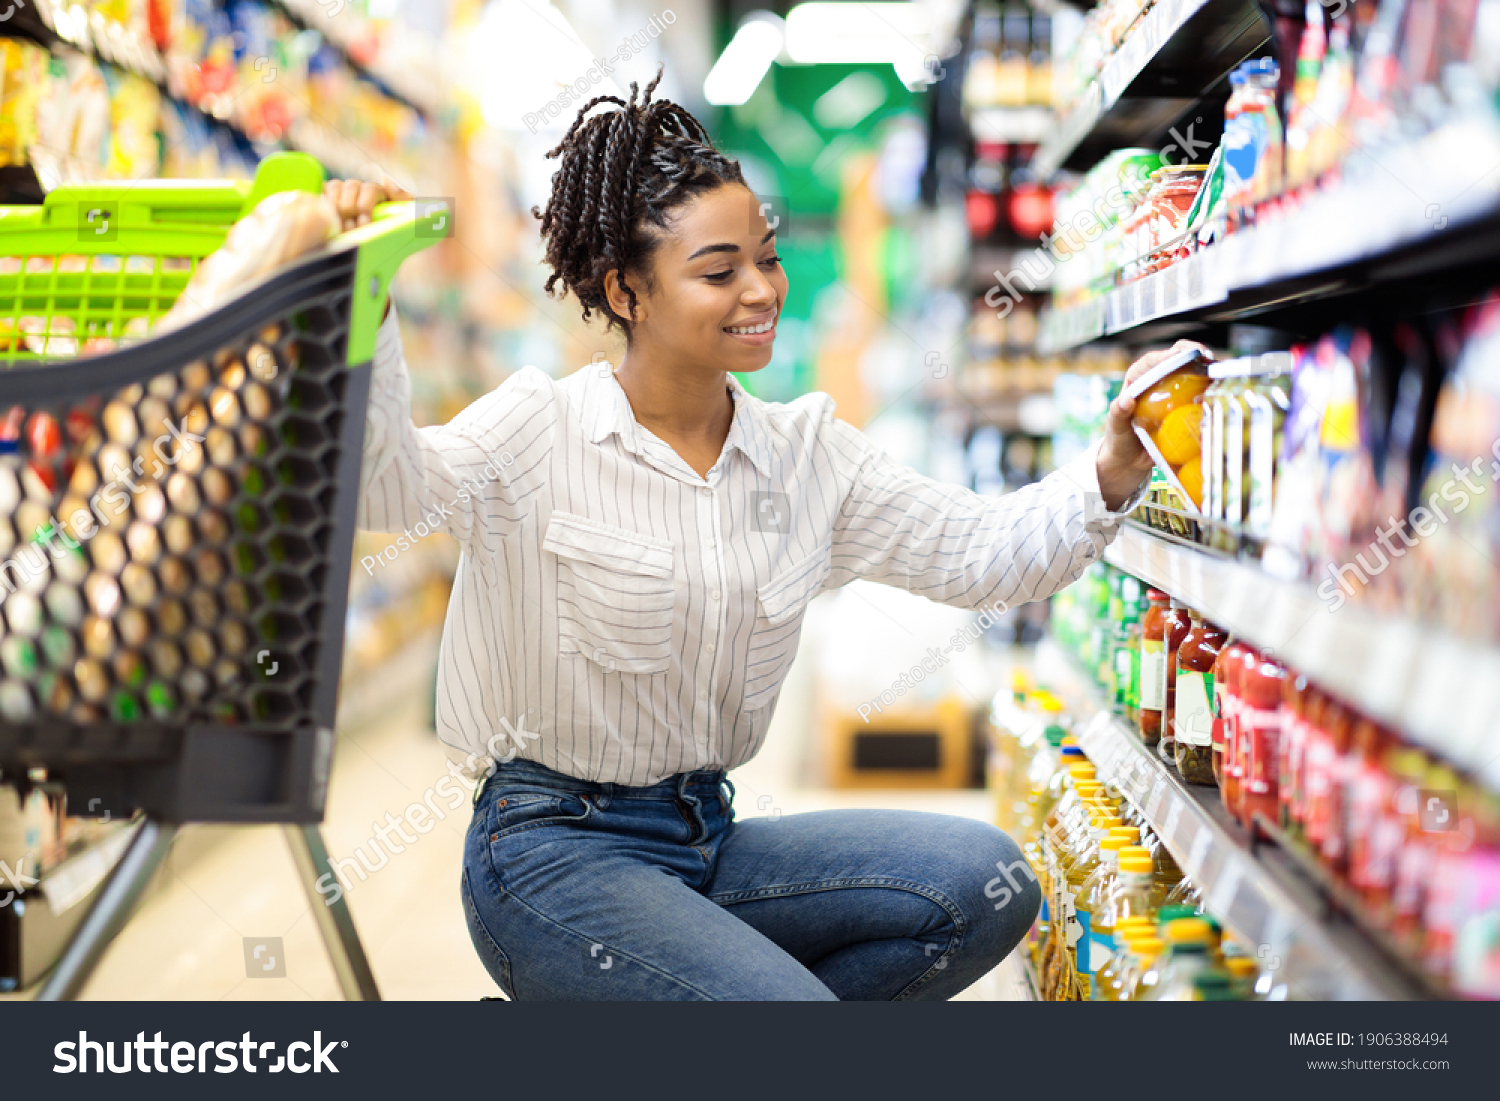 African Woman Buyer Choosing Products Doing Stock Photo 1906388494 ...